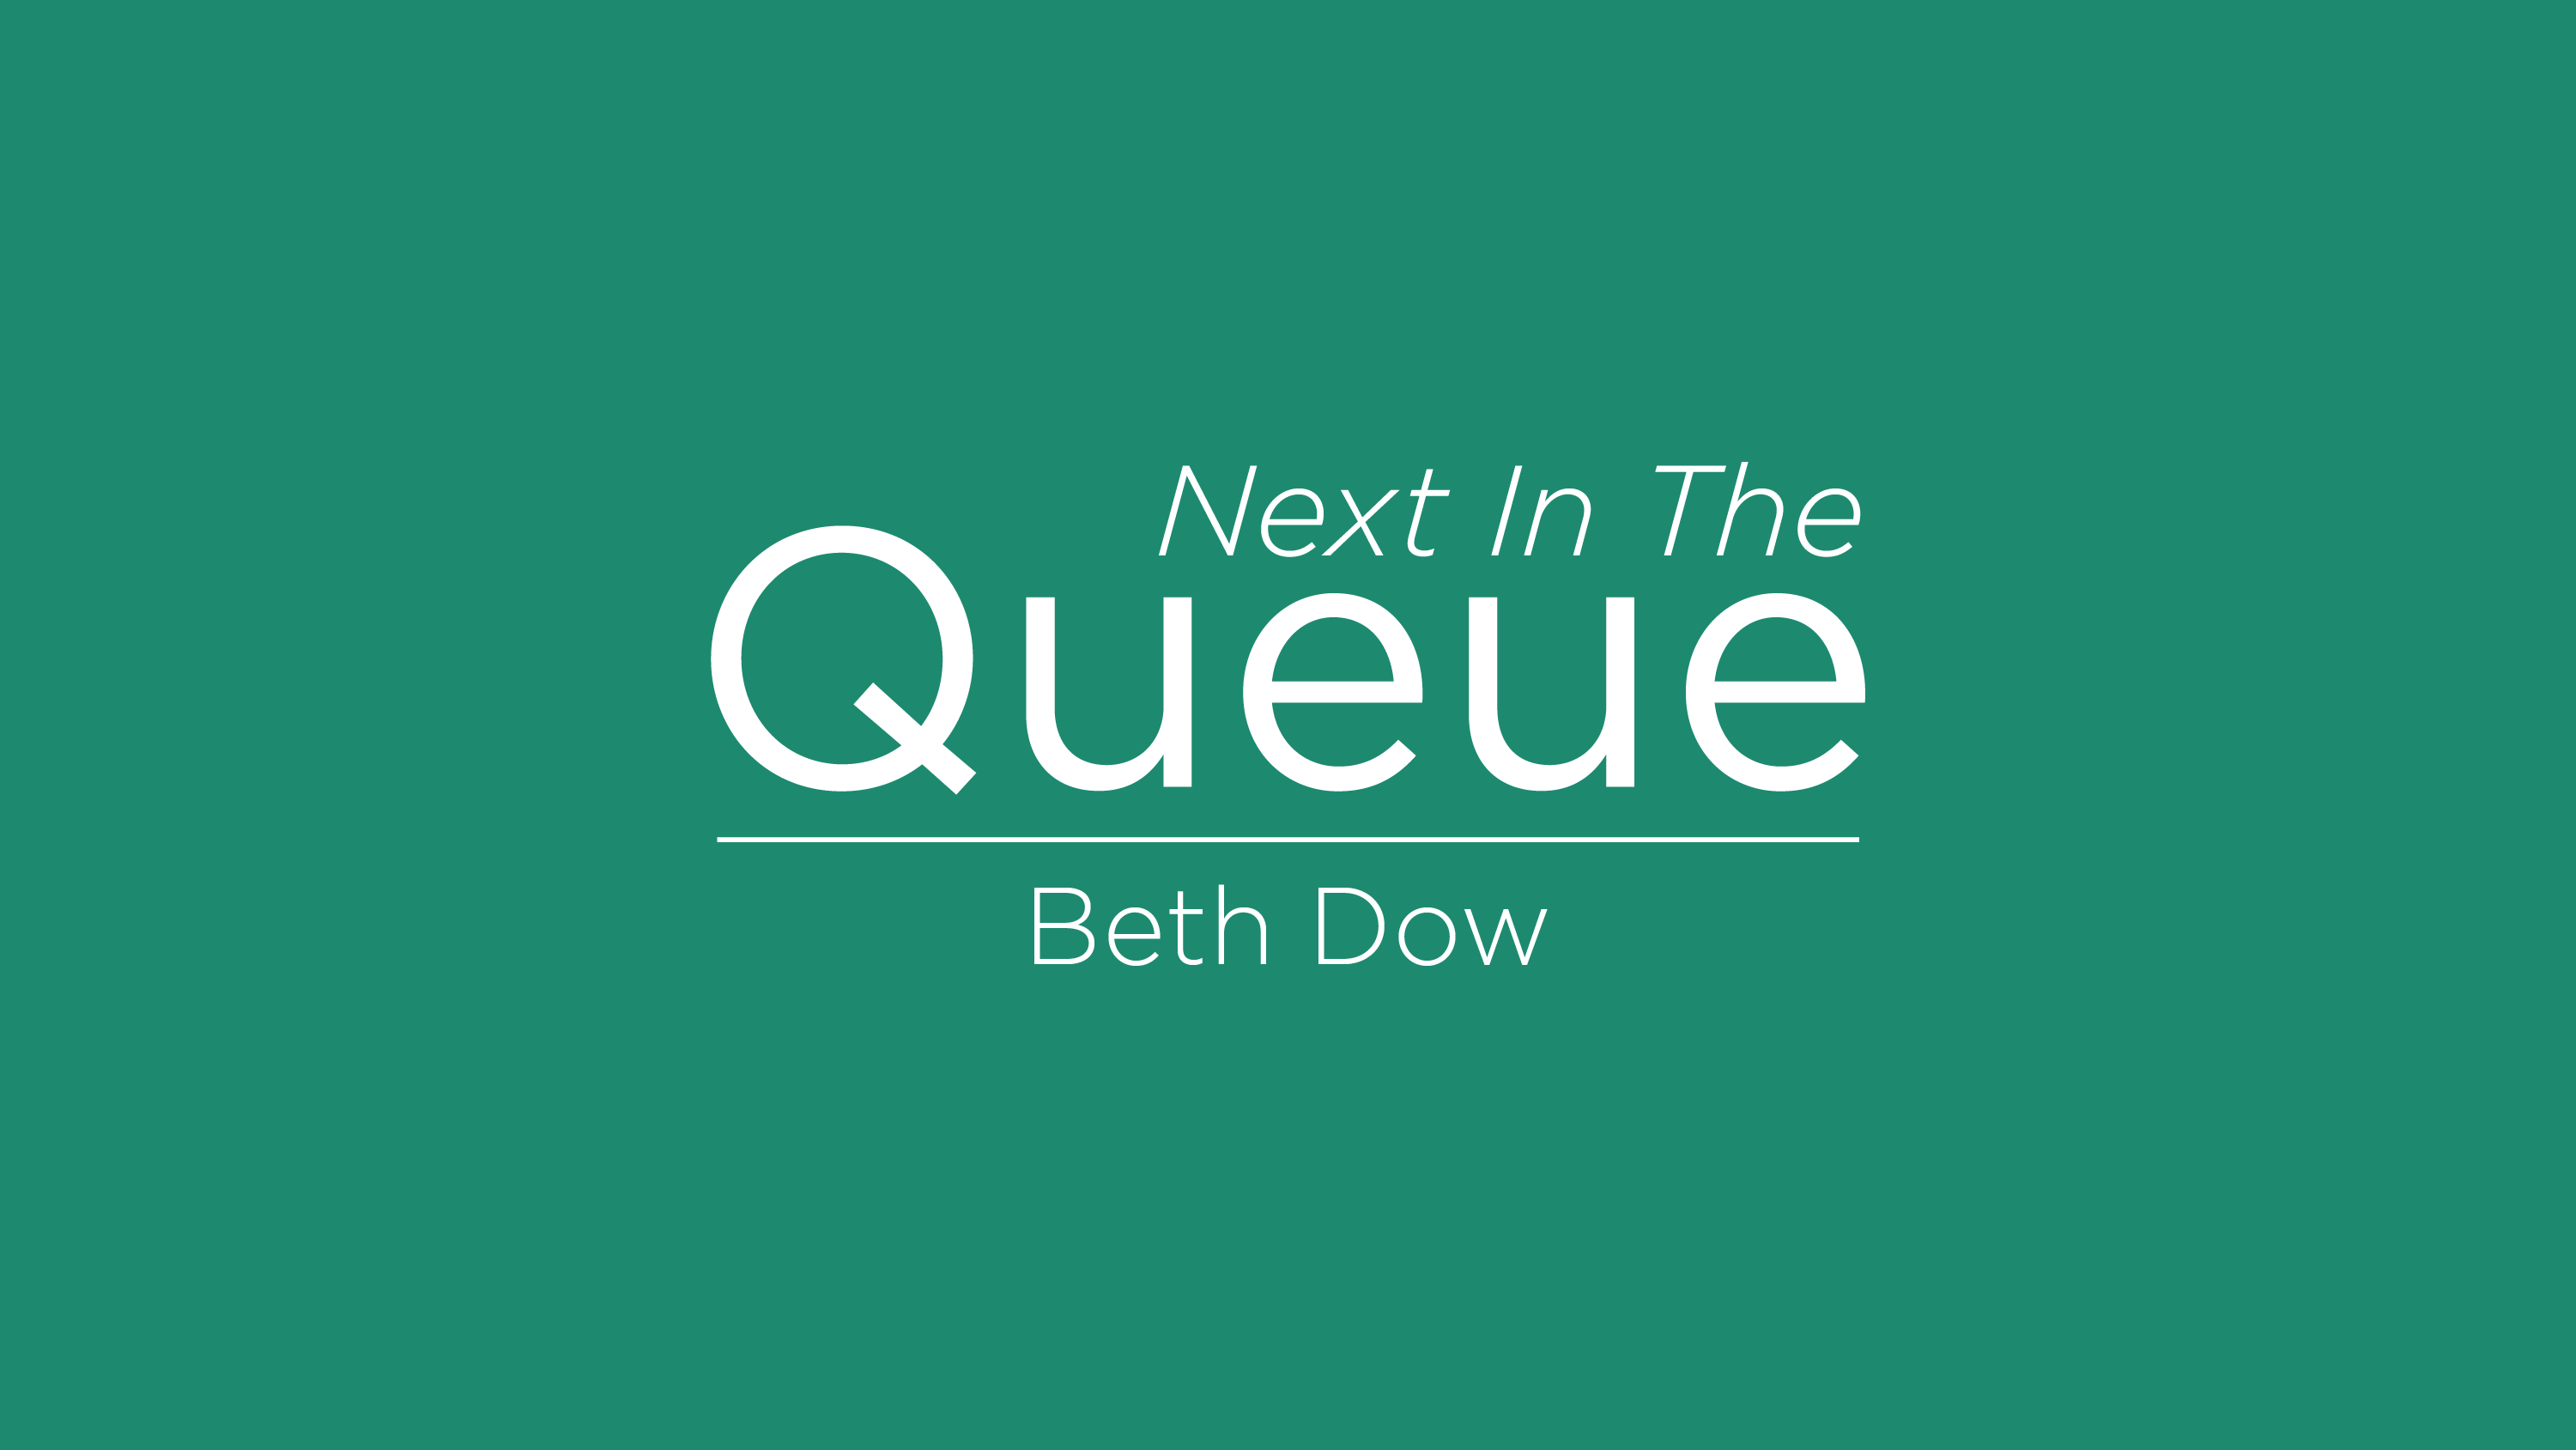 blog post cover graphic for The Queue featuring Beth Dow